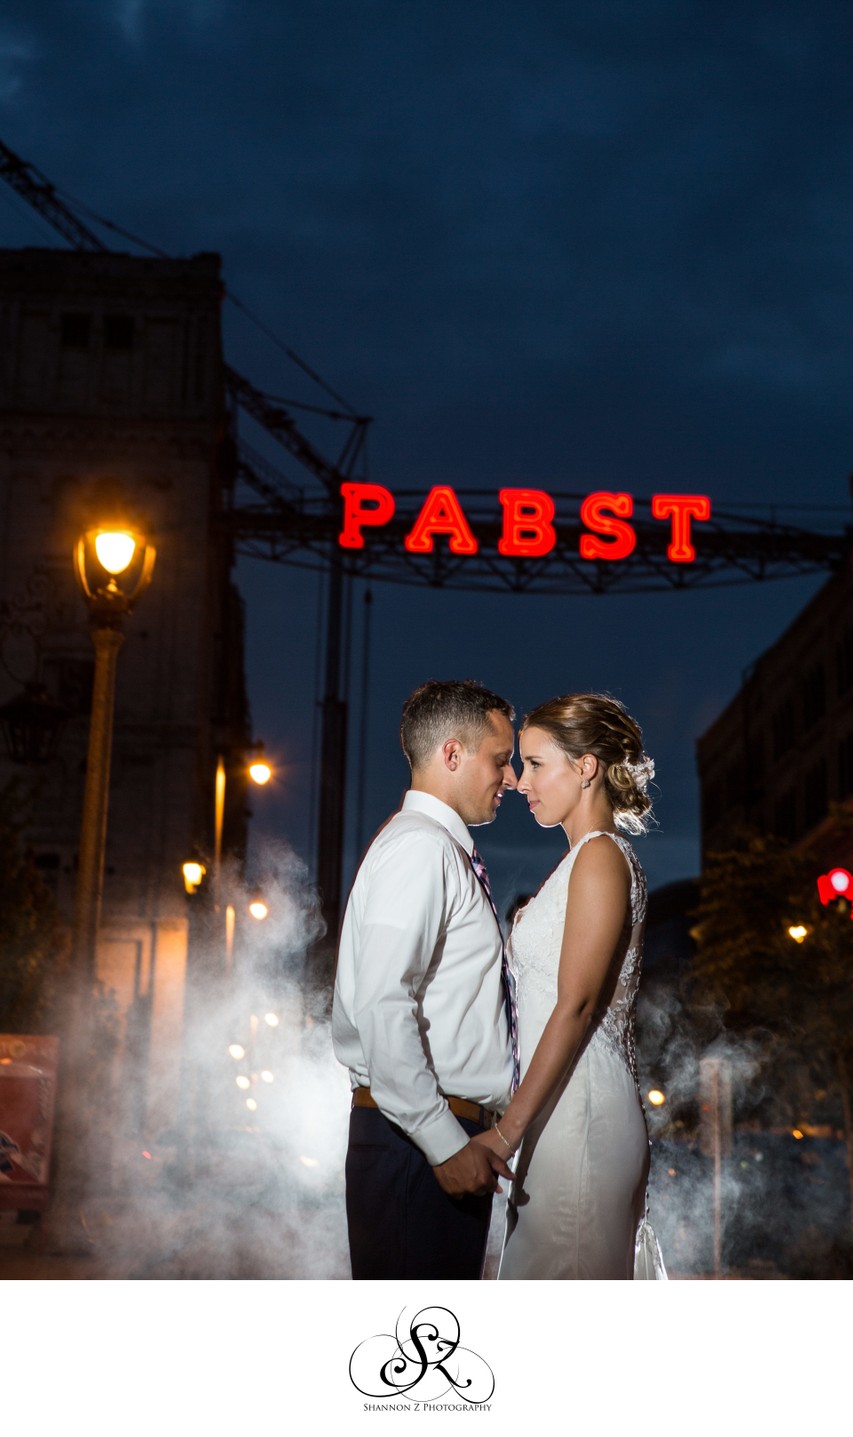 Pabst Sign:Historic Pabst Brewery Wedding